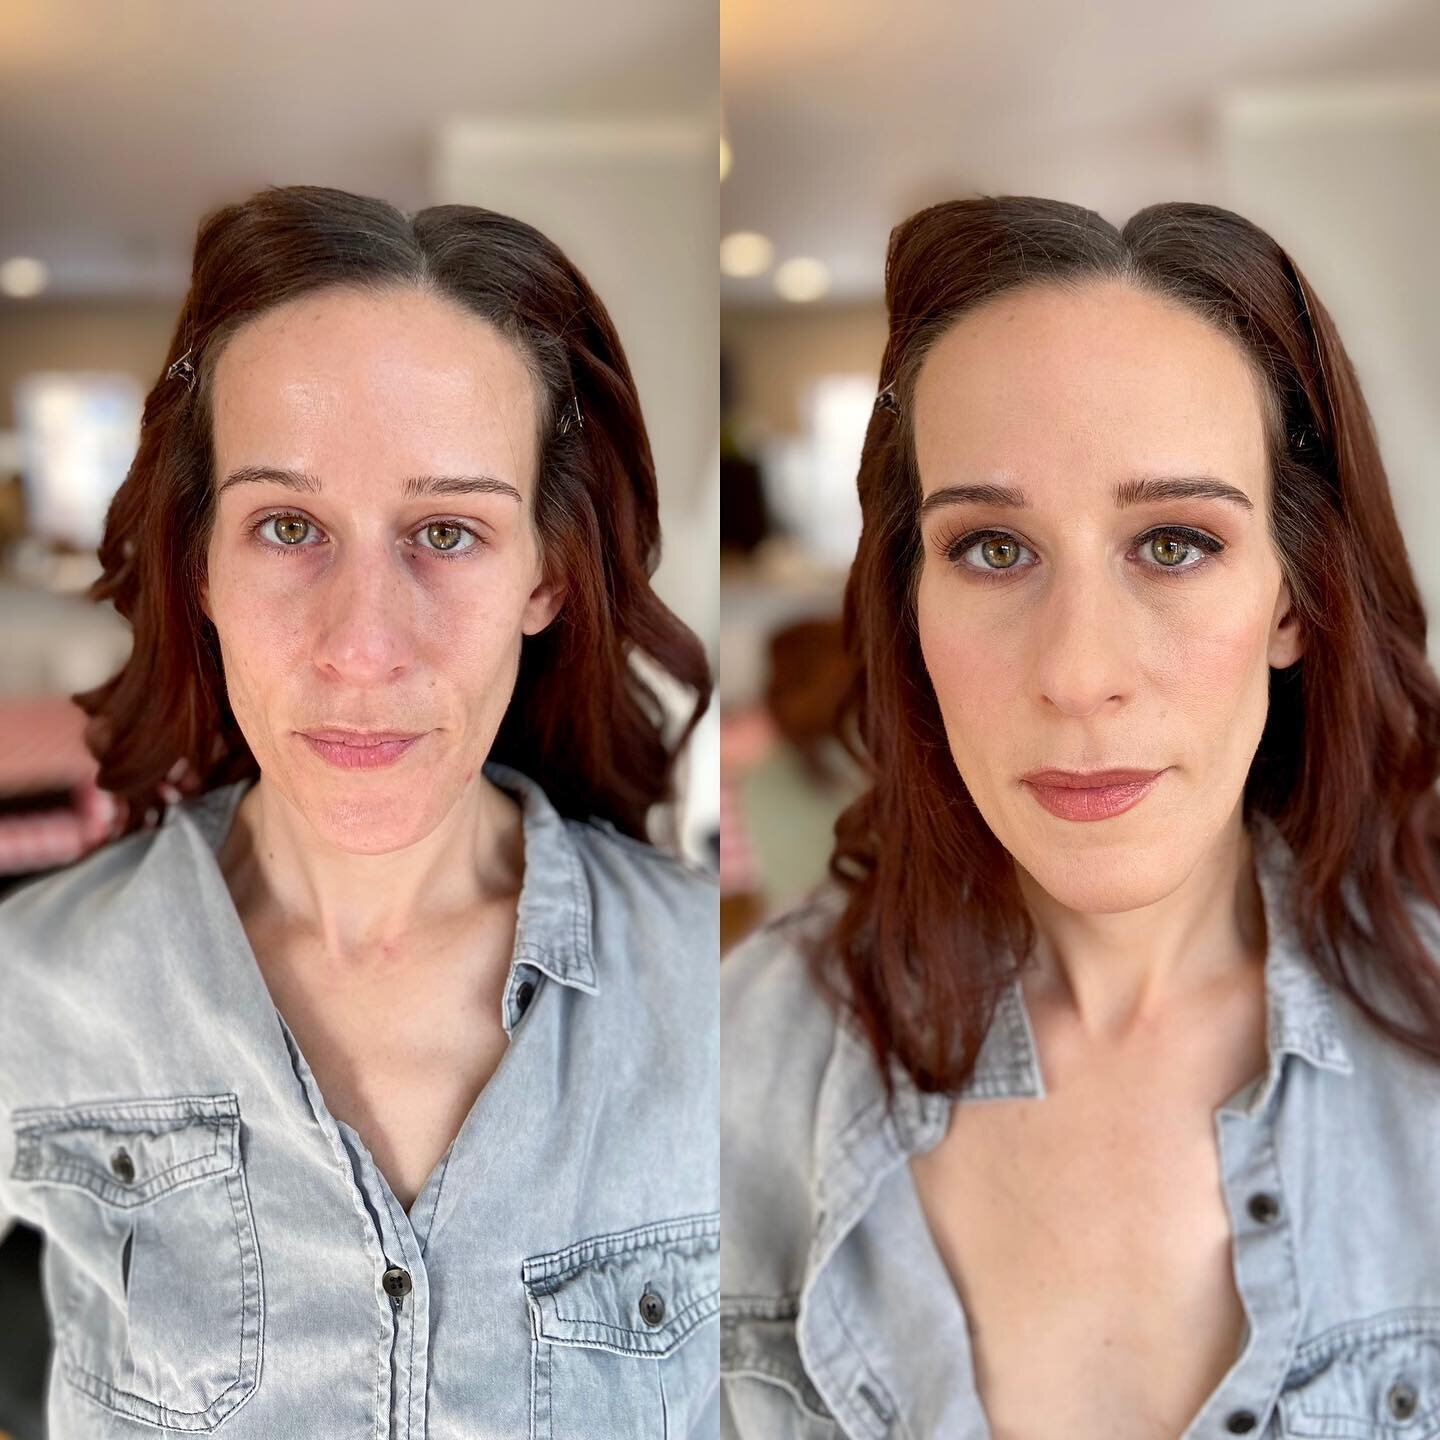 ✨Before &amp; After ✨| Airbrush Foundation ❤️ 
For @priscillambeauty